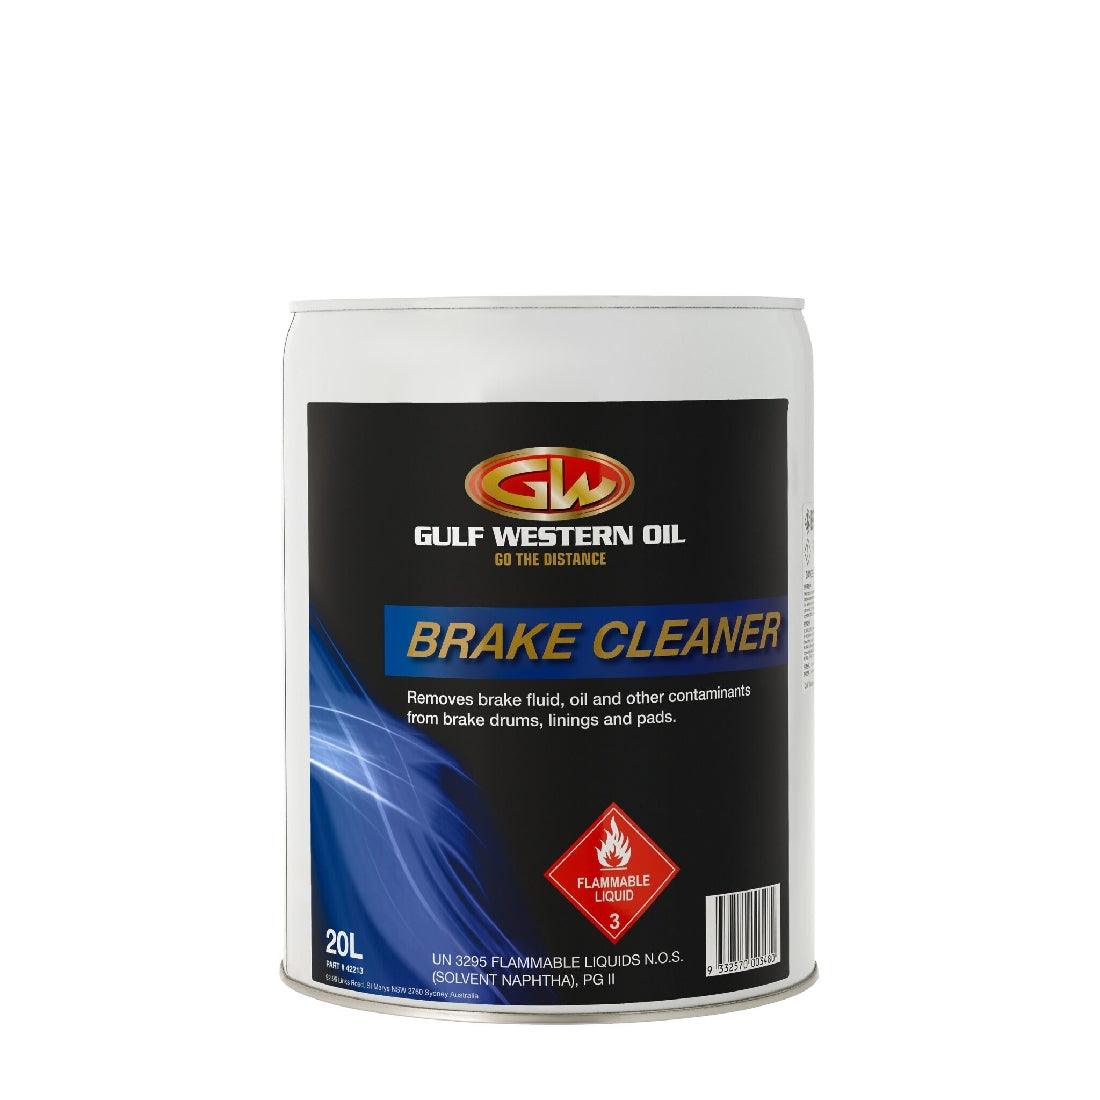 BRAKECLEANER SOLVENT 20L - GB FASTENERS